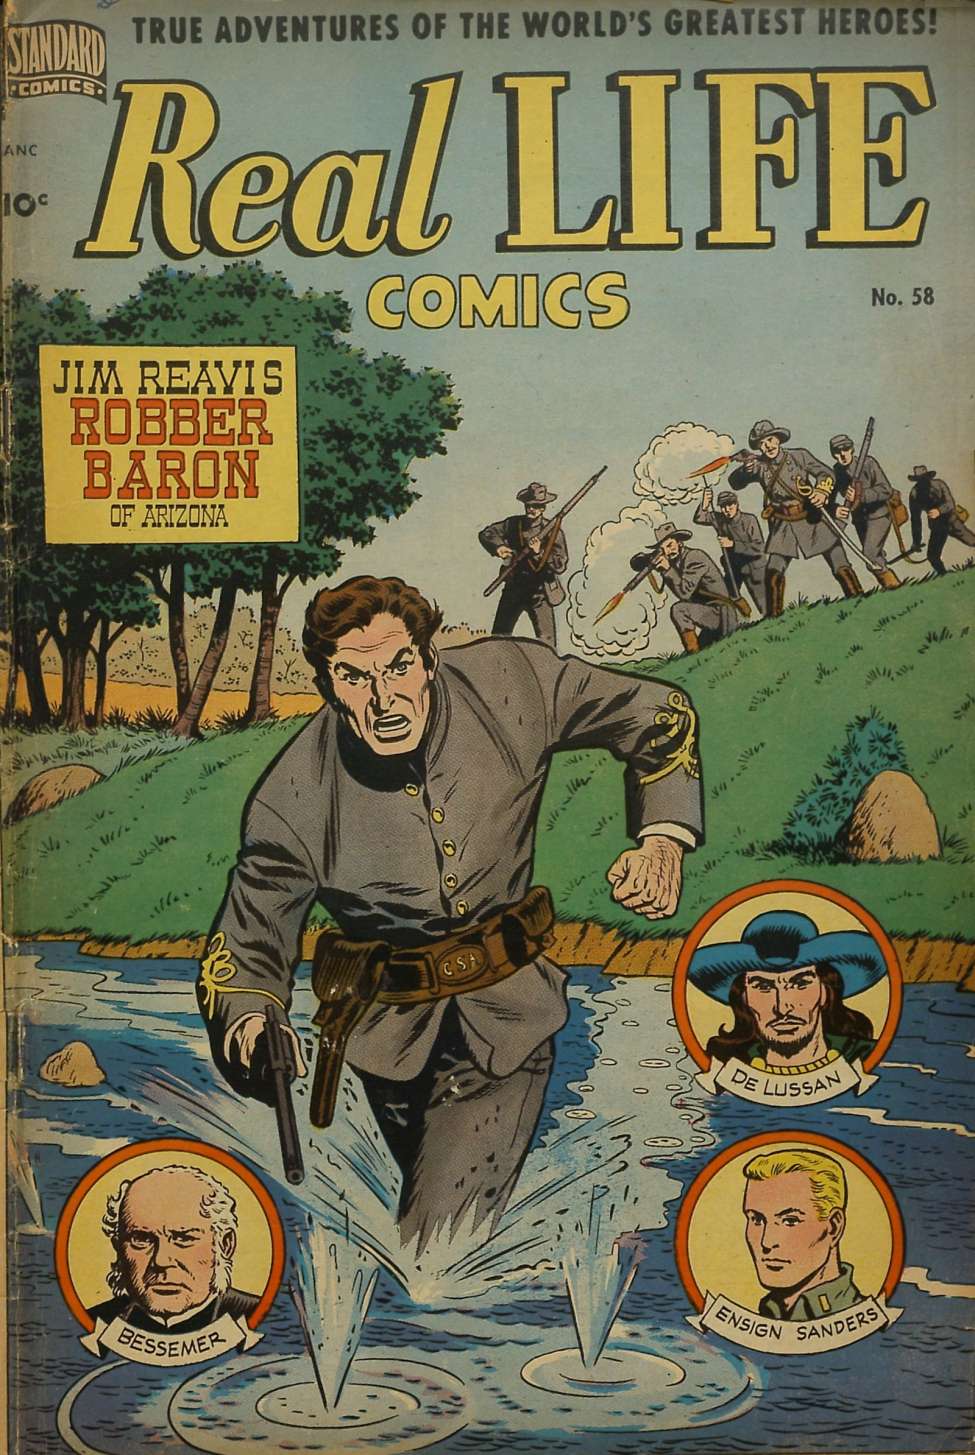 Comic Book Cover For Real Life Comics 58 (alt) - Version 2